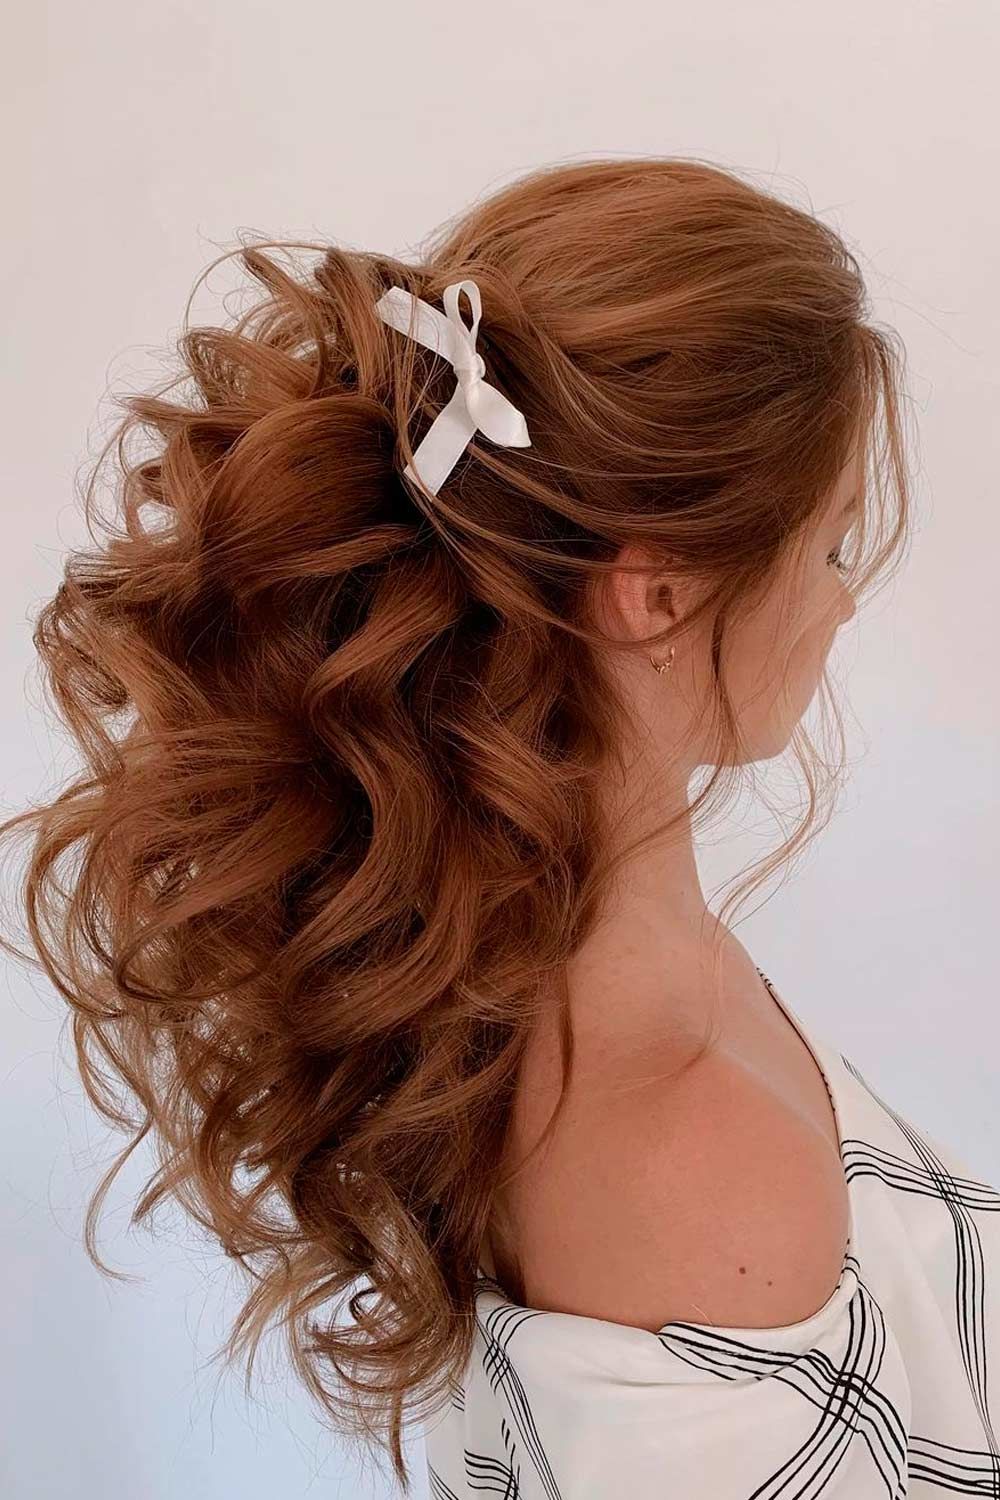 34 Best Ideas of Formal Hairstyles for Long Hair 2020 | LoveHairStyles